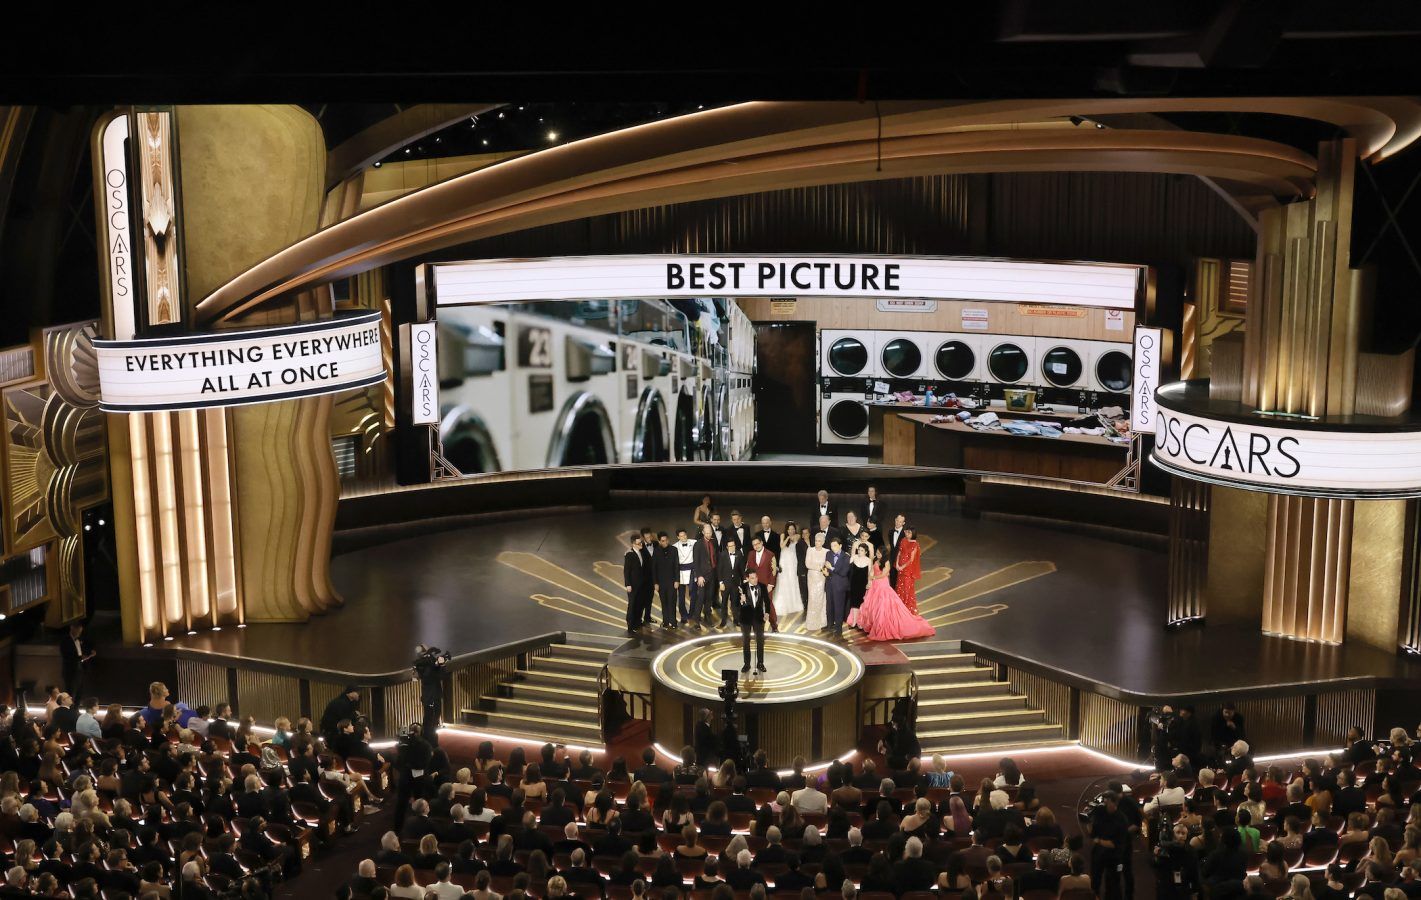 'Everything Everywhere All at Once' wins big at the Oscars 2023